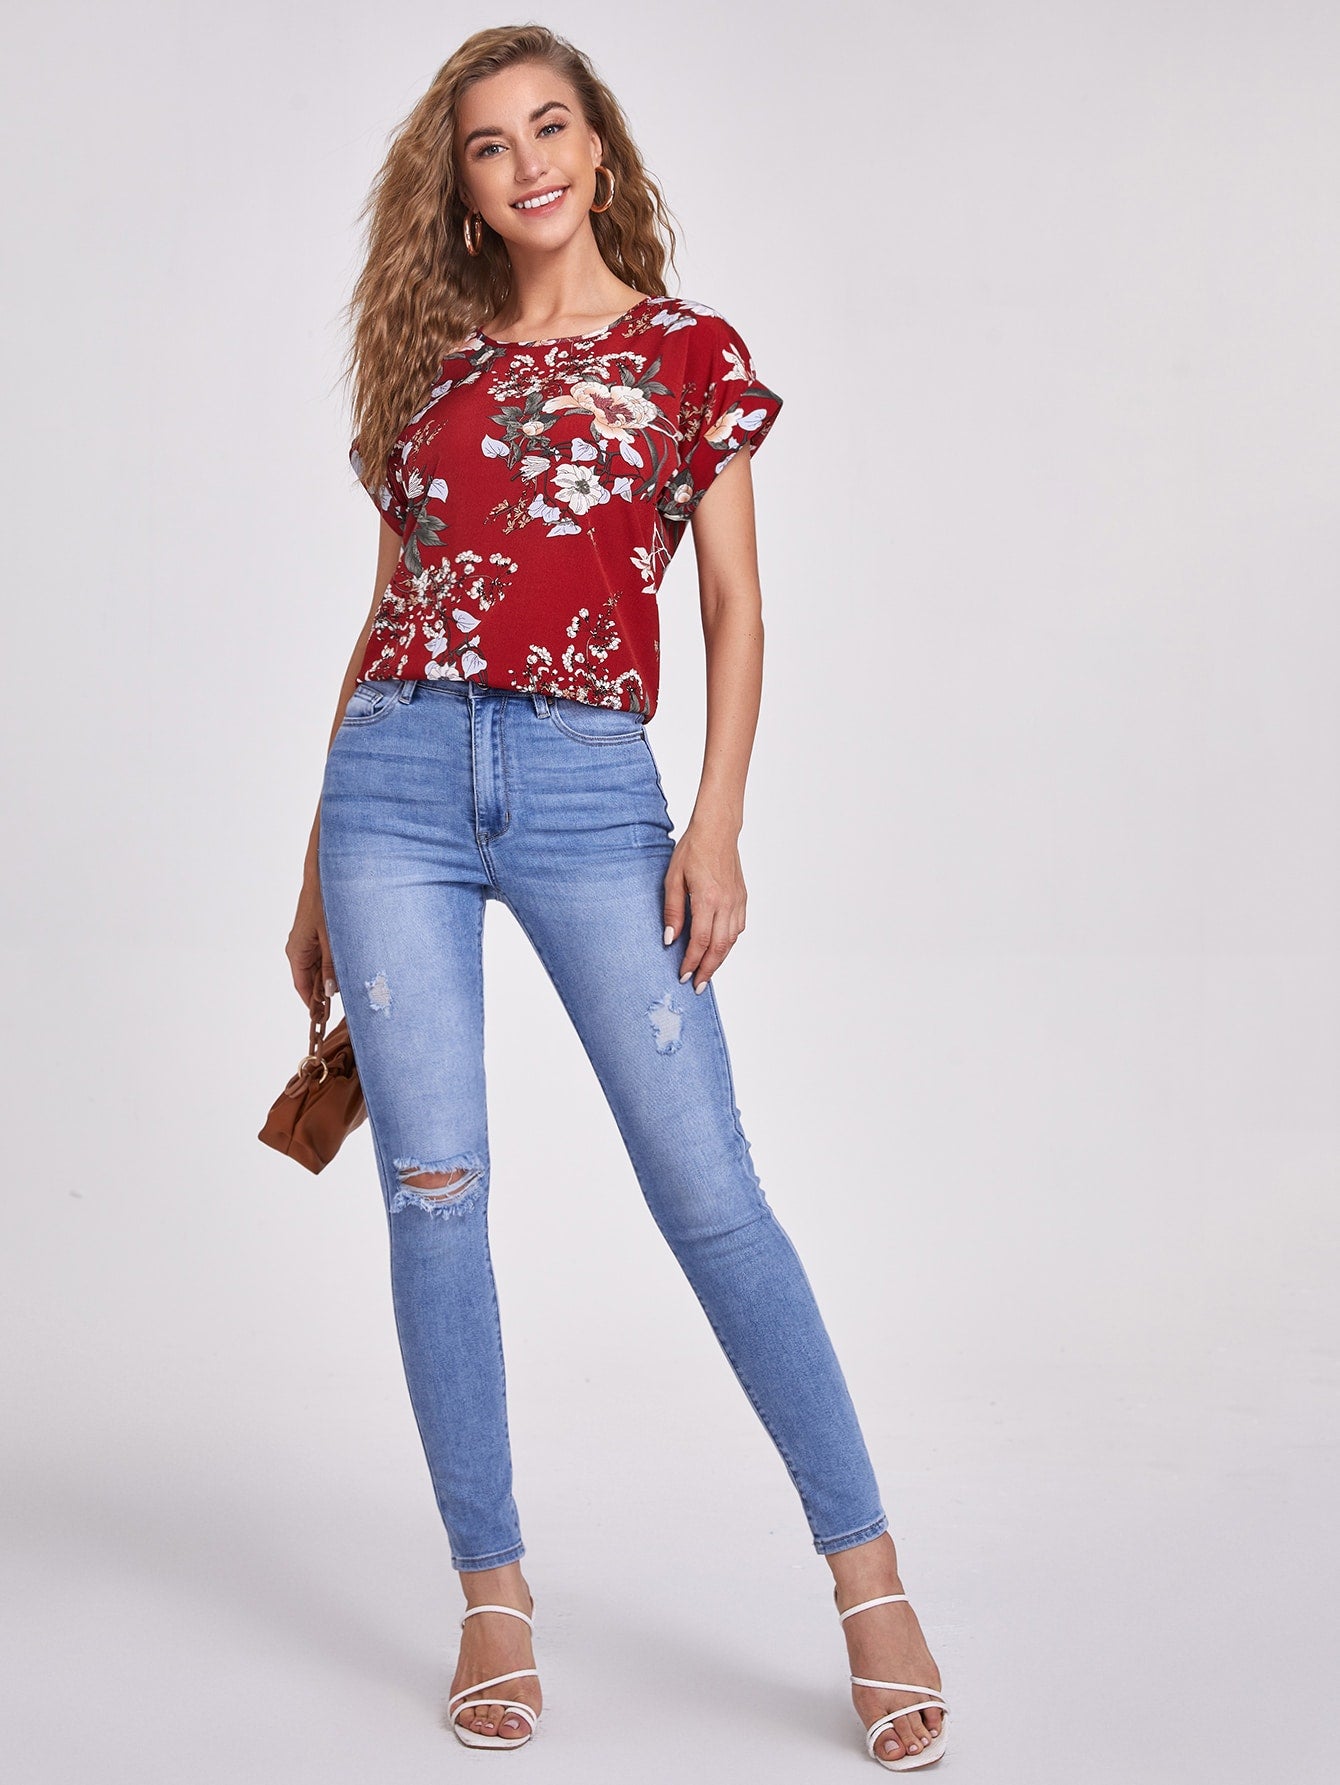 Cuffed Sleeve Floral Print Top